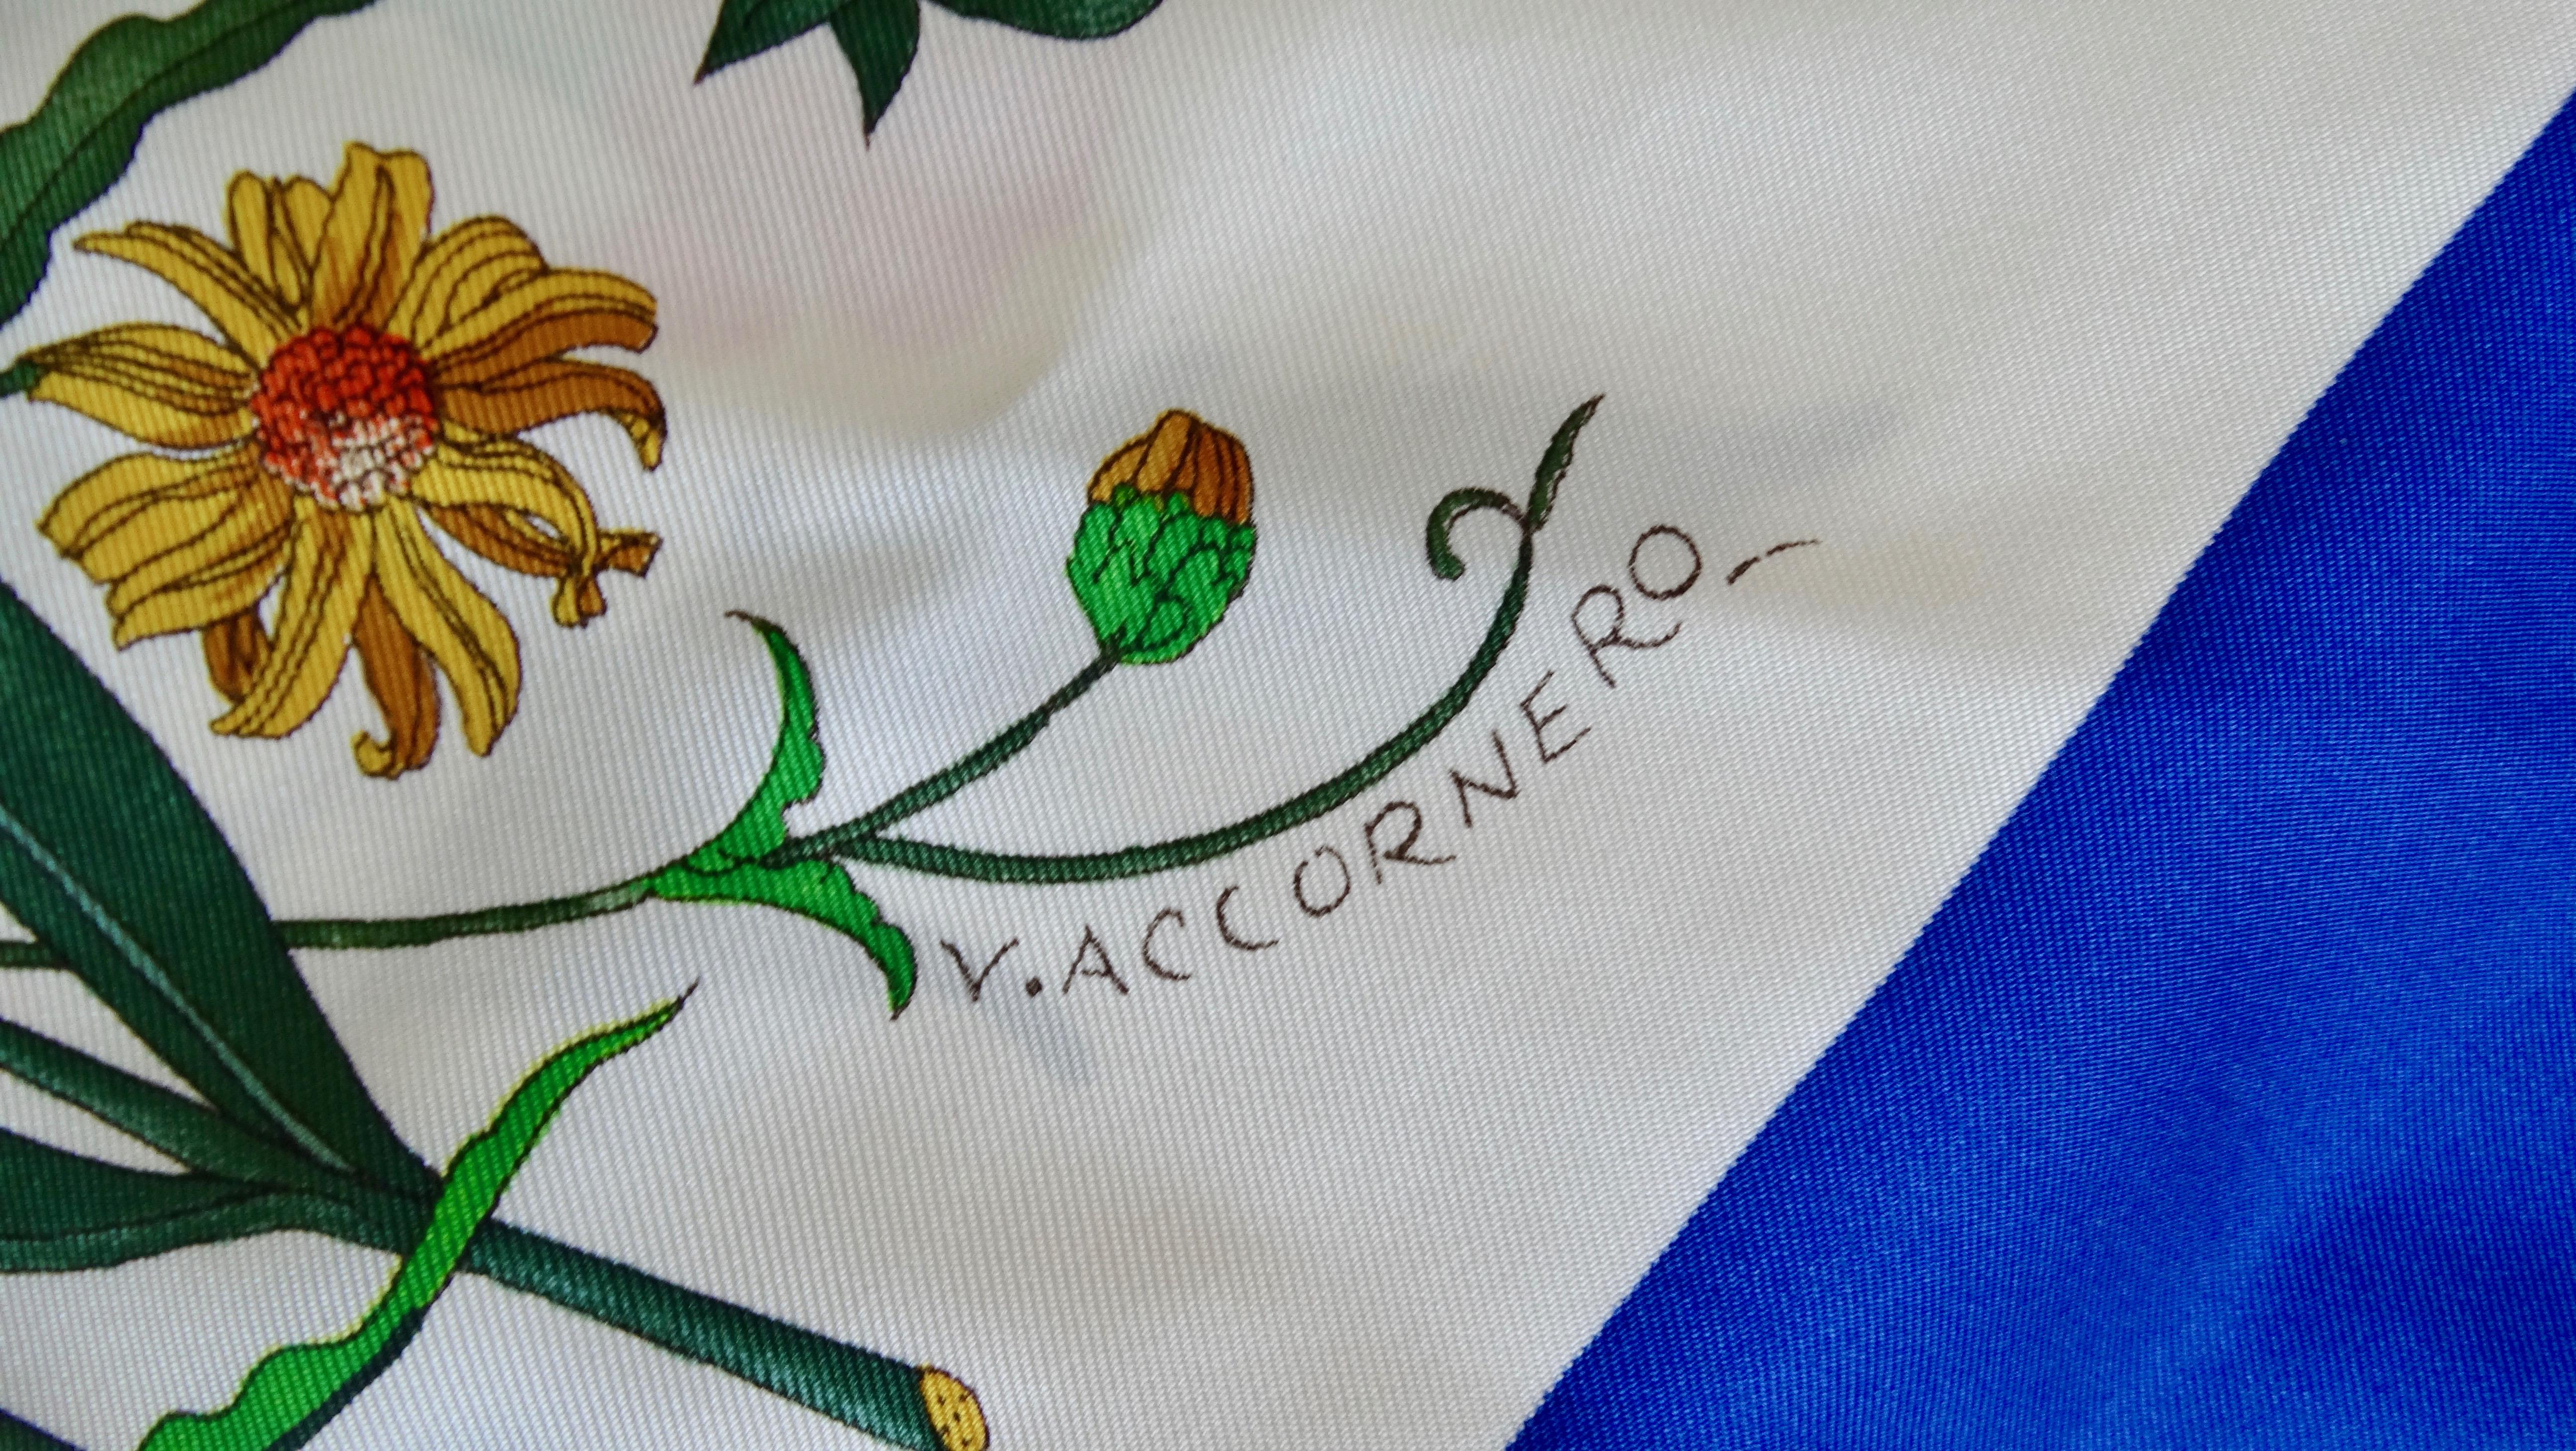 We Will Never Be Over Gucci Flora! Circa 1980s, this Gucci scarf features the iconic flora print which includes a variety of flowers, dragonflies, butterflies, and beetles. Includes a vibrant royal blue trim and rolled edges. Is signed Gucci in the